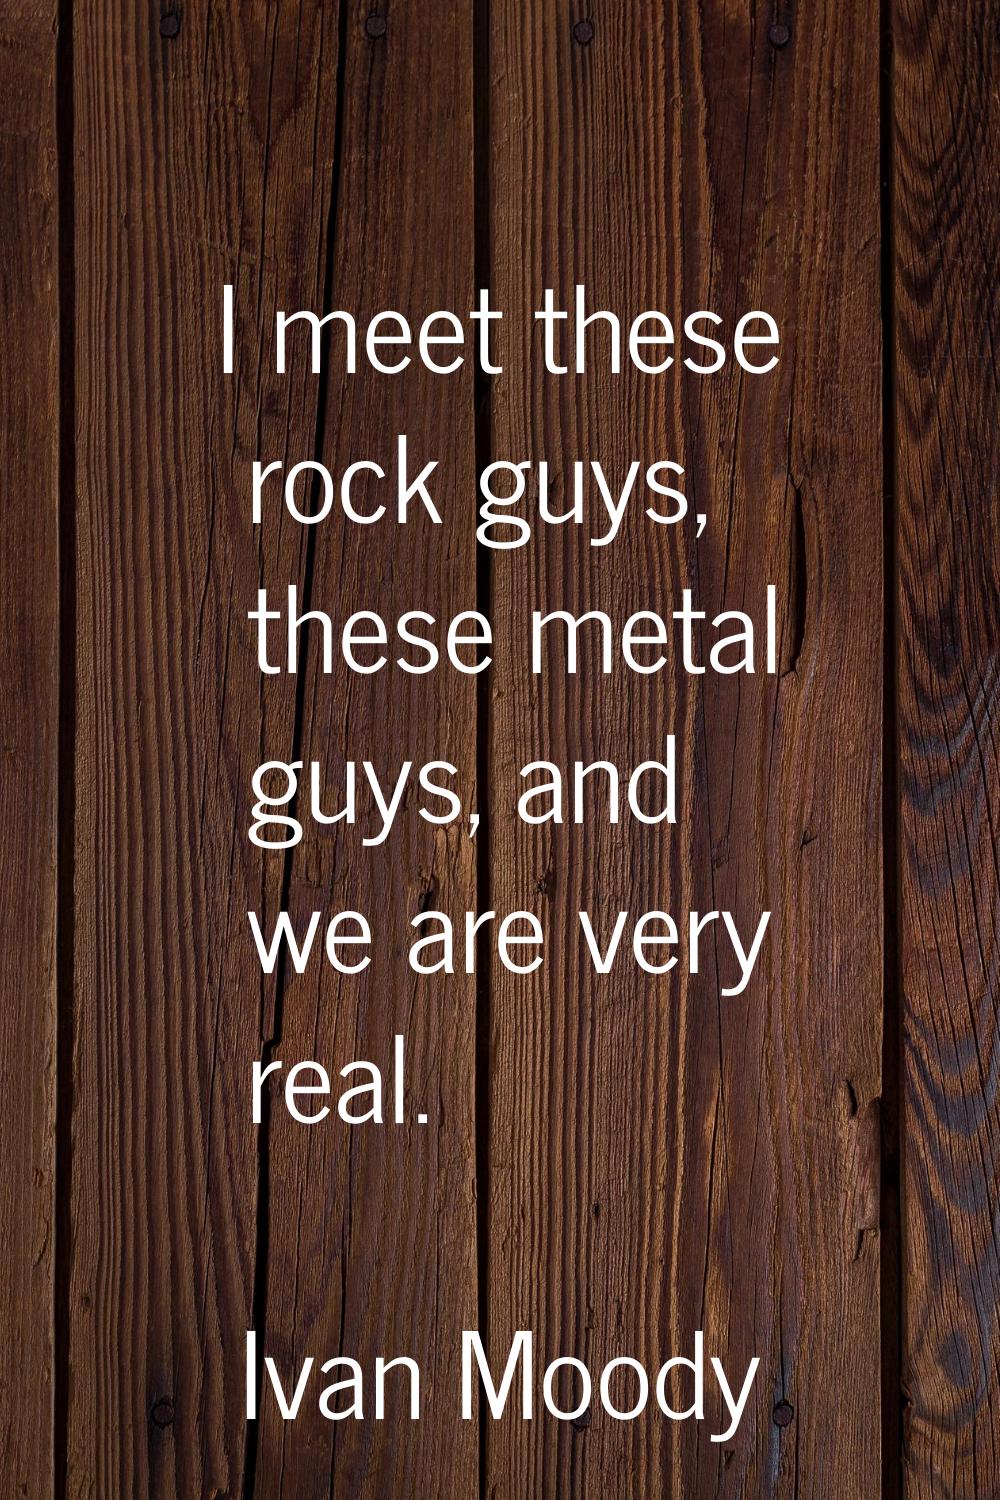 I meet these rock guys, these metal guys, and we are very real.